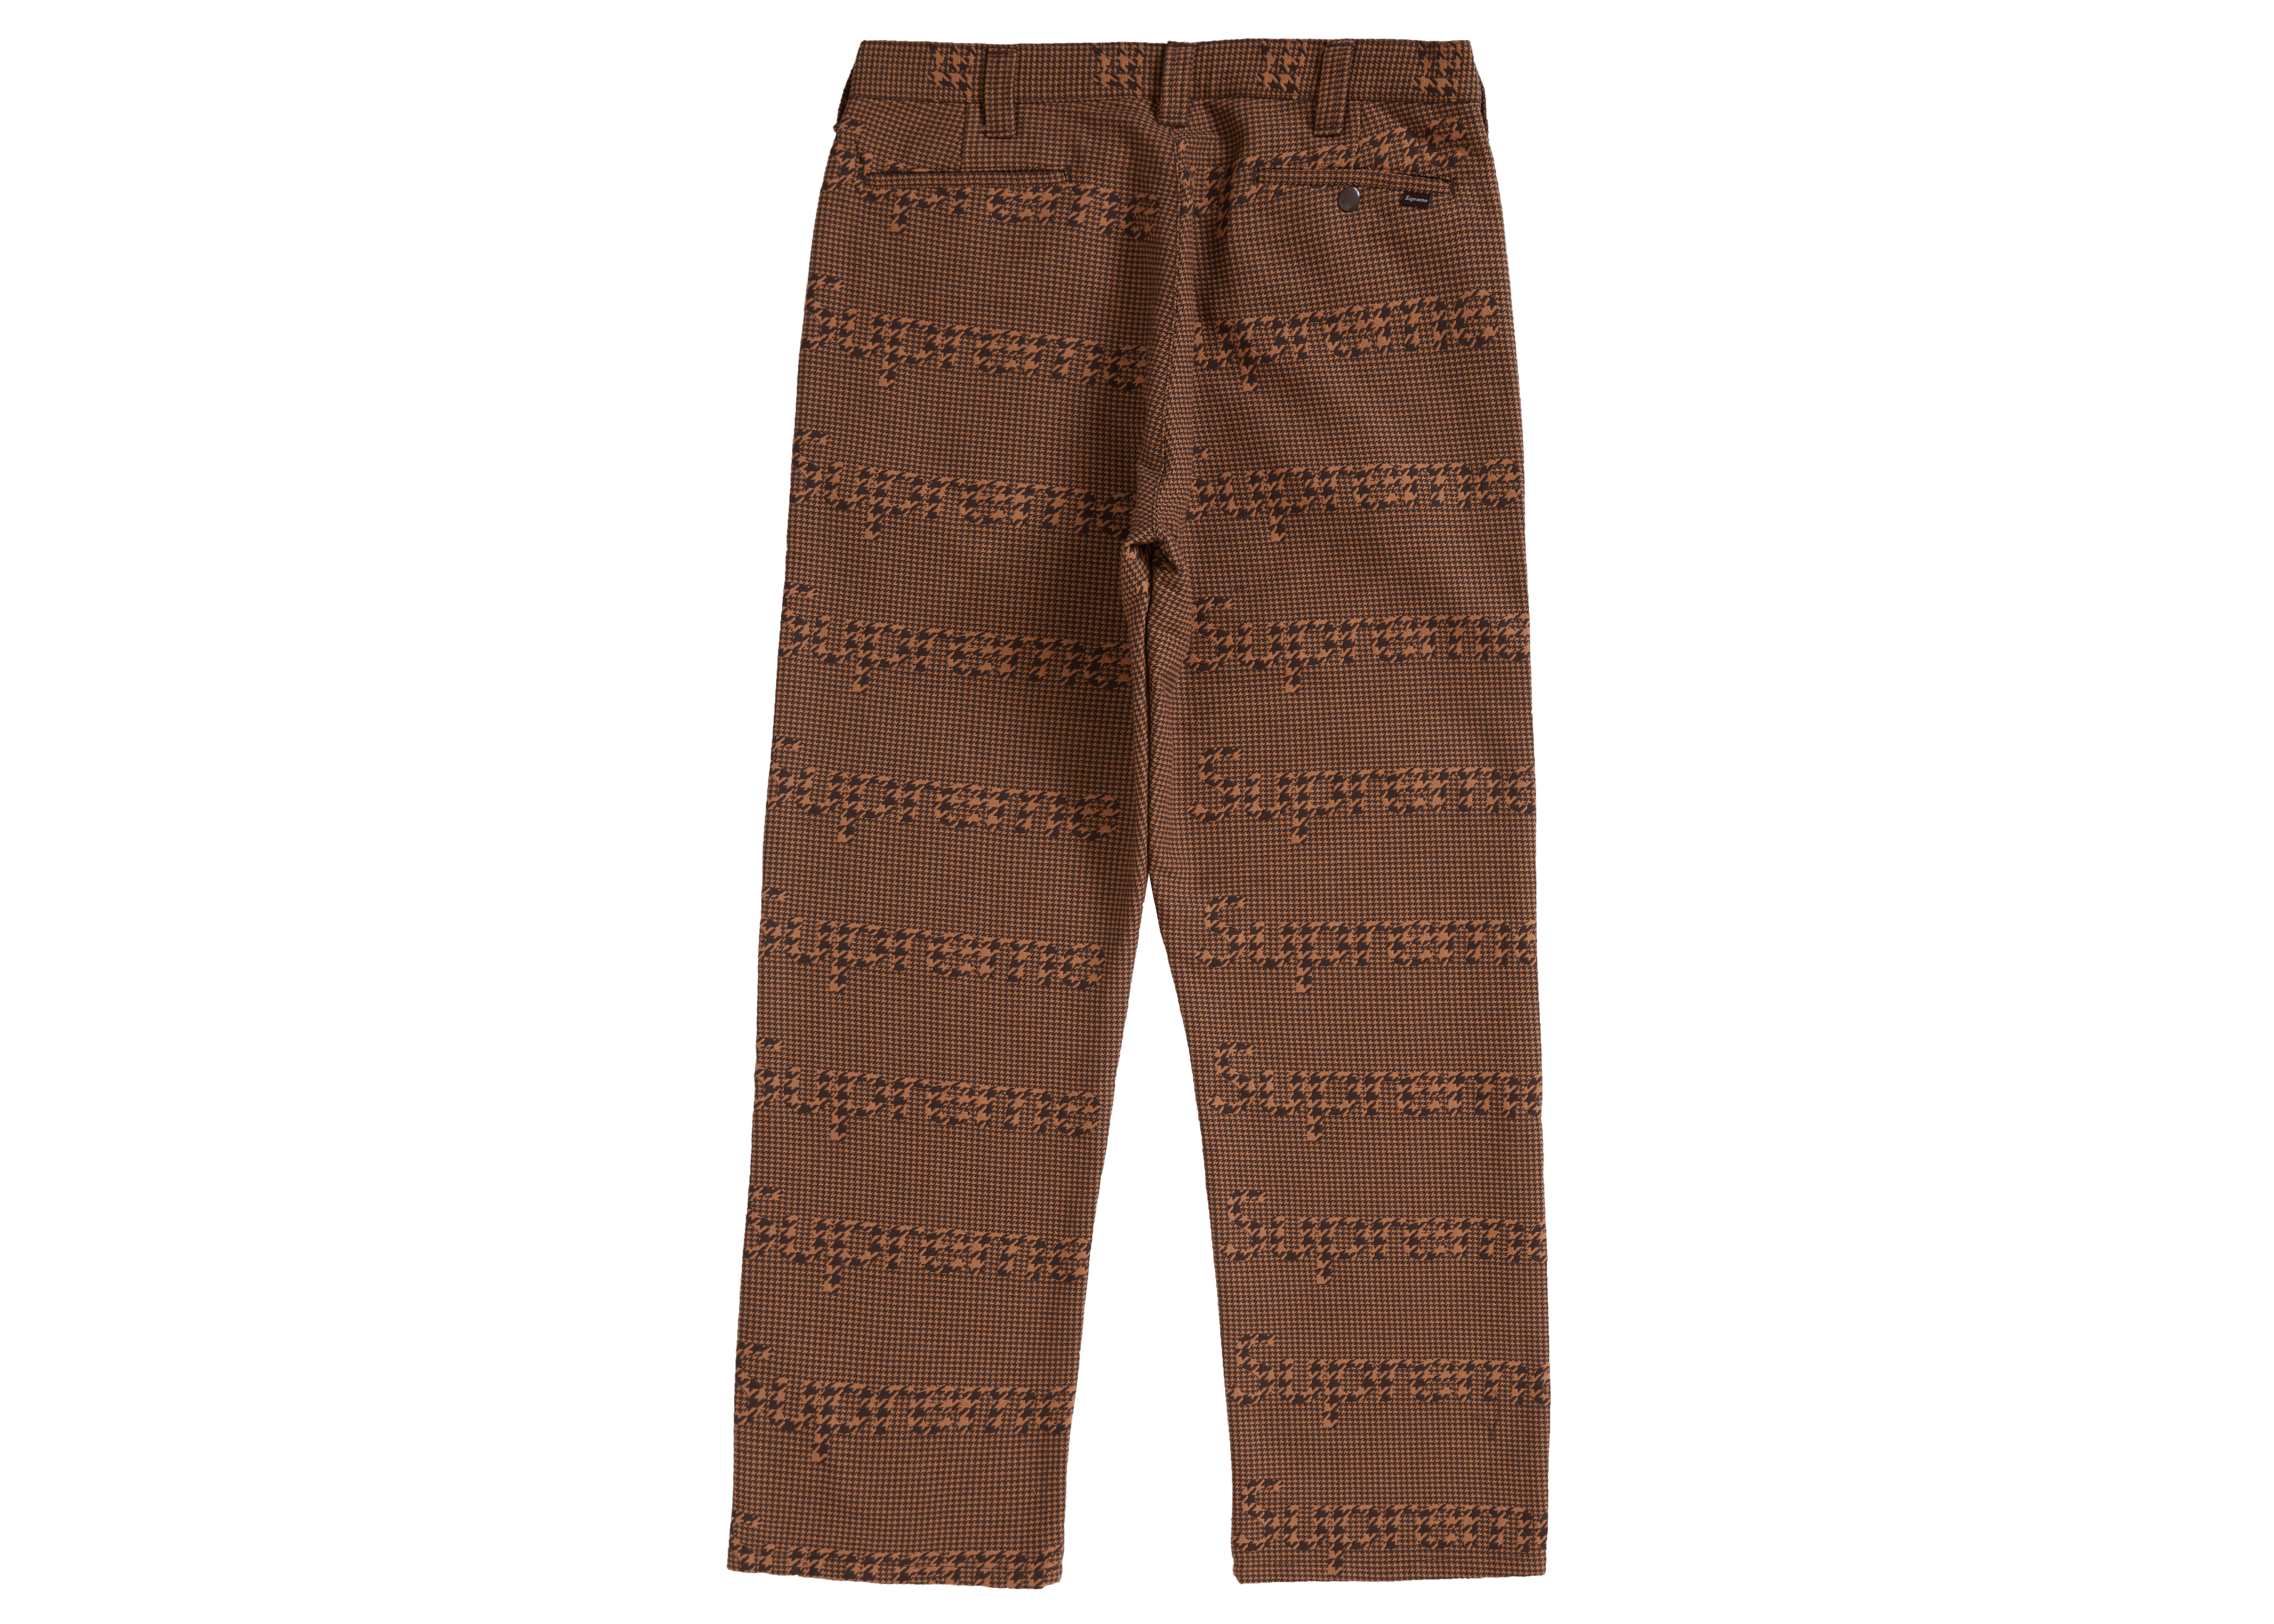 Supreme Work Pant (FW20) Brown Houndstooth Men's - FW20 - US